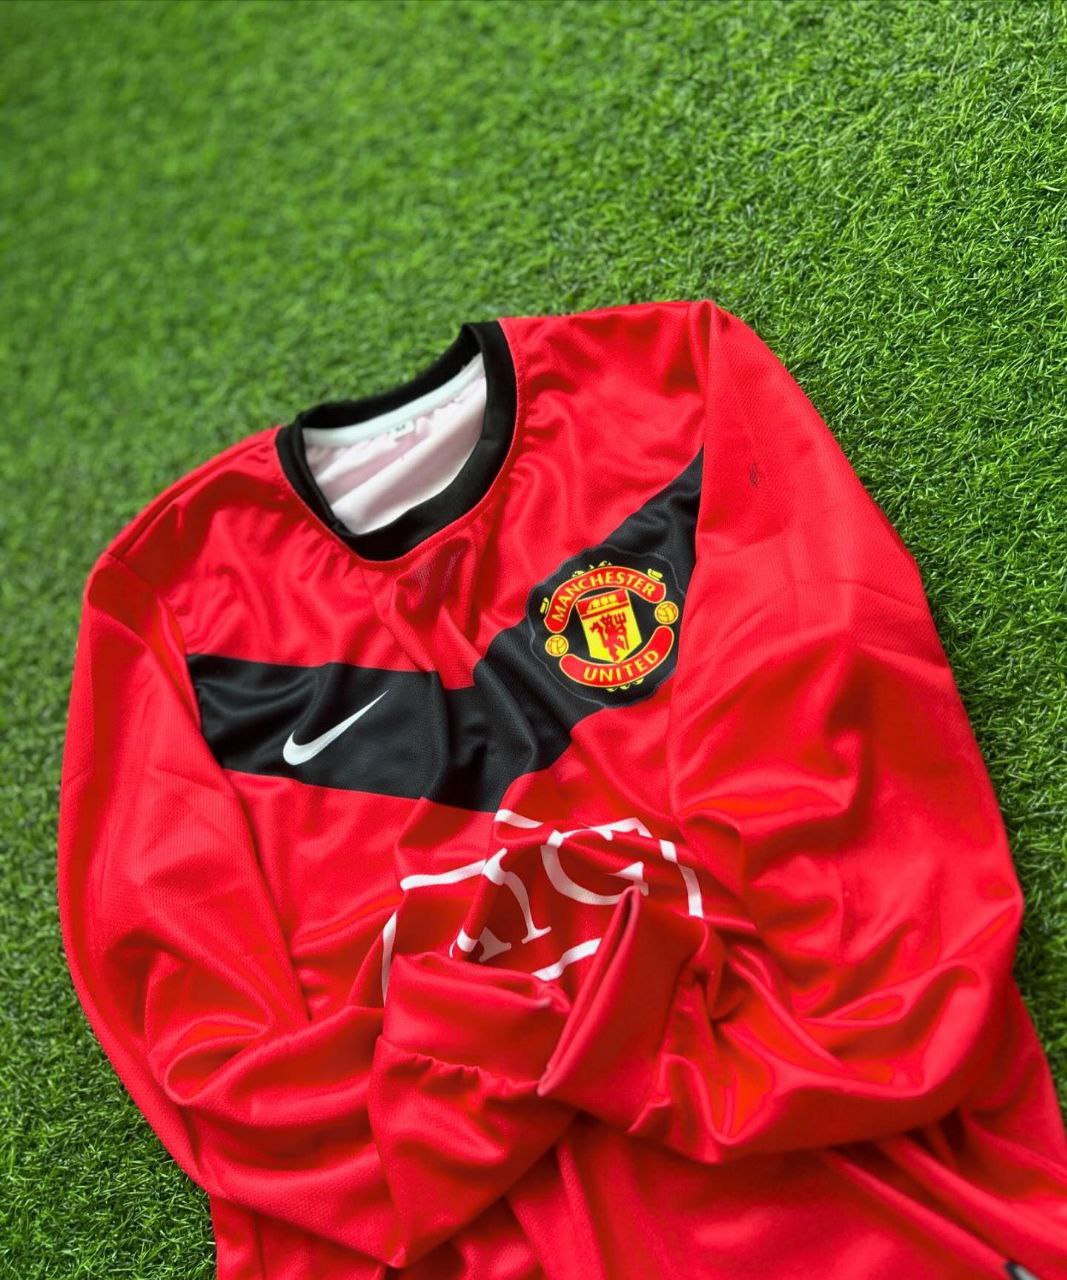 Wayne Rooney Manchester Unıted Red Retro Jersey